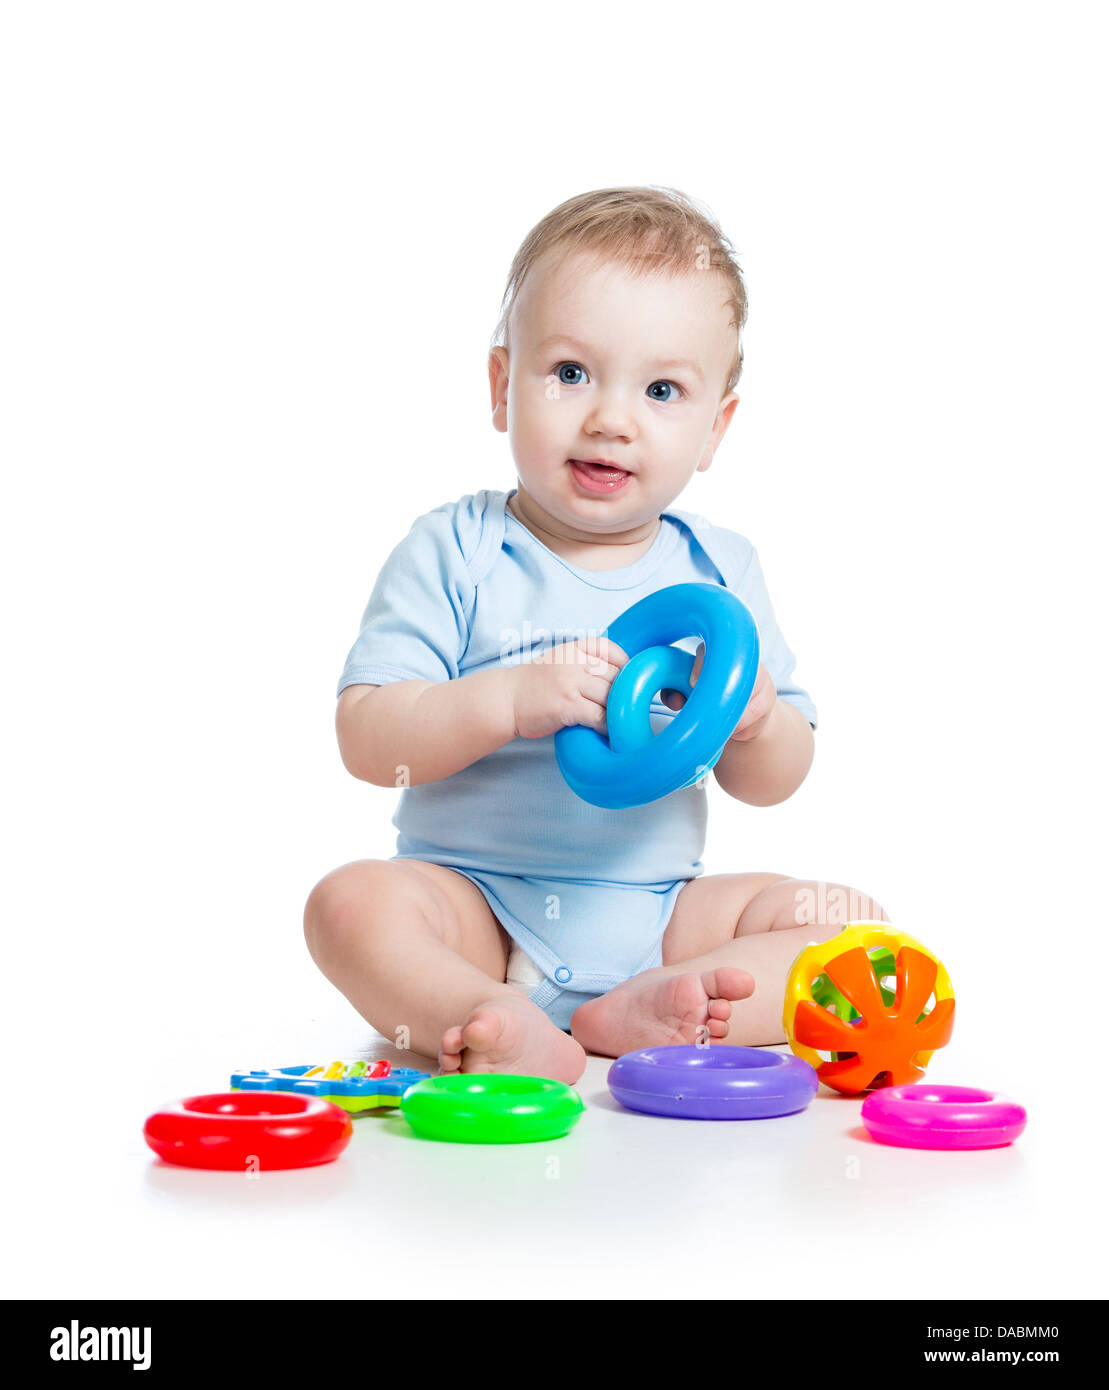 baby boy playing with color toys Stock Photo